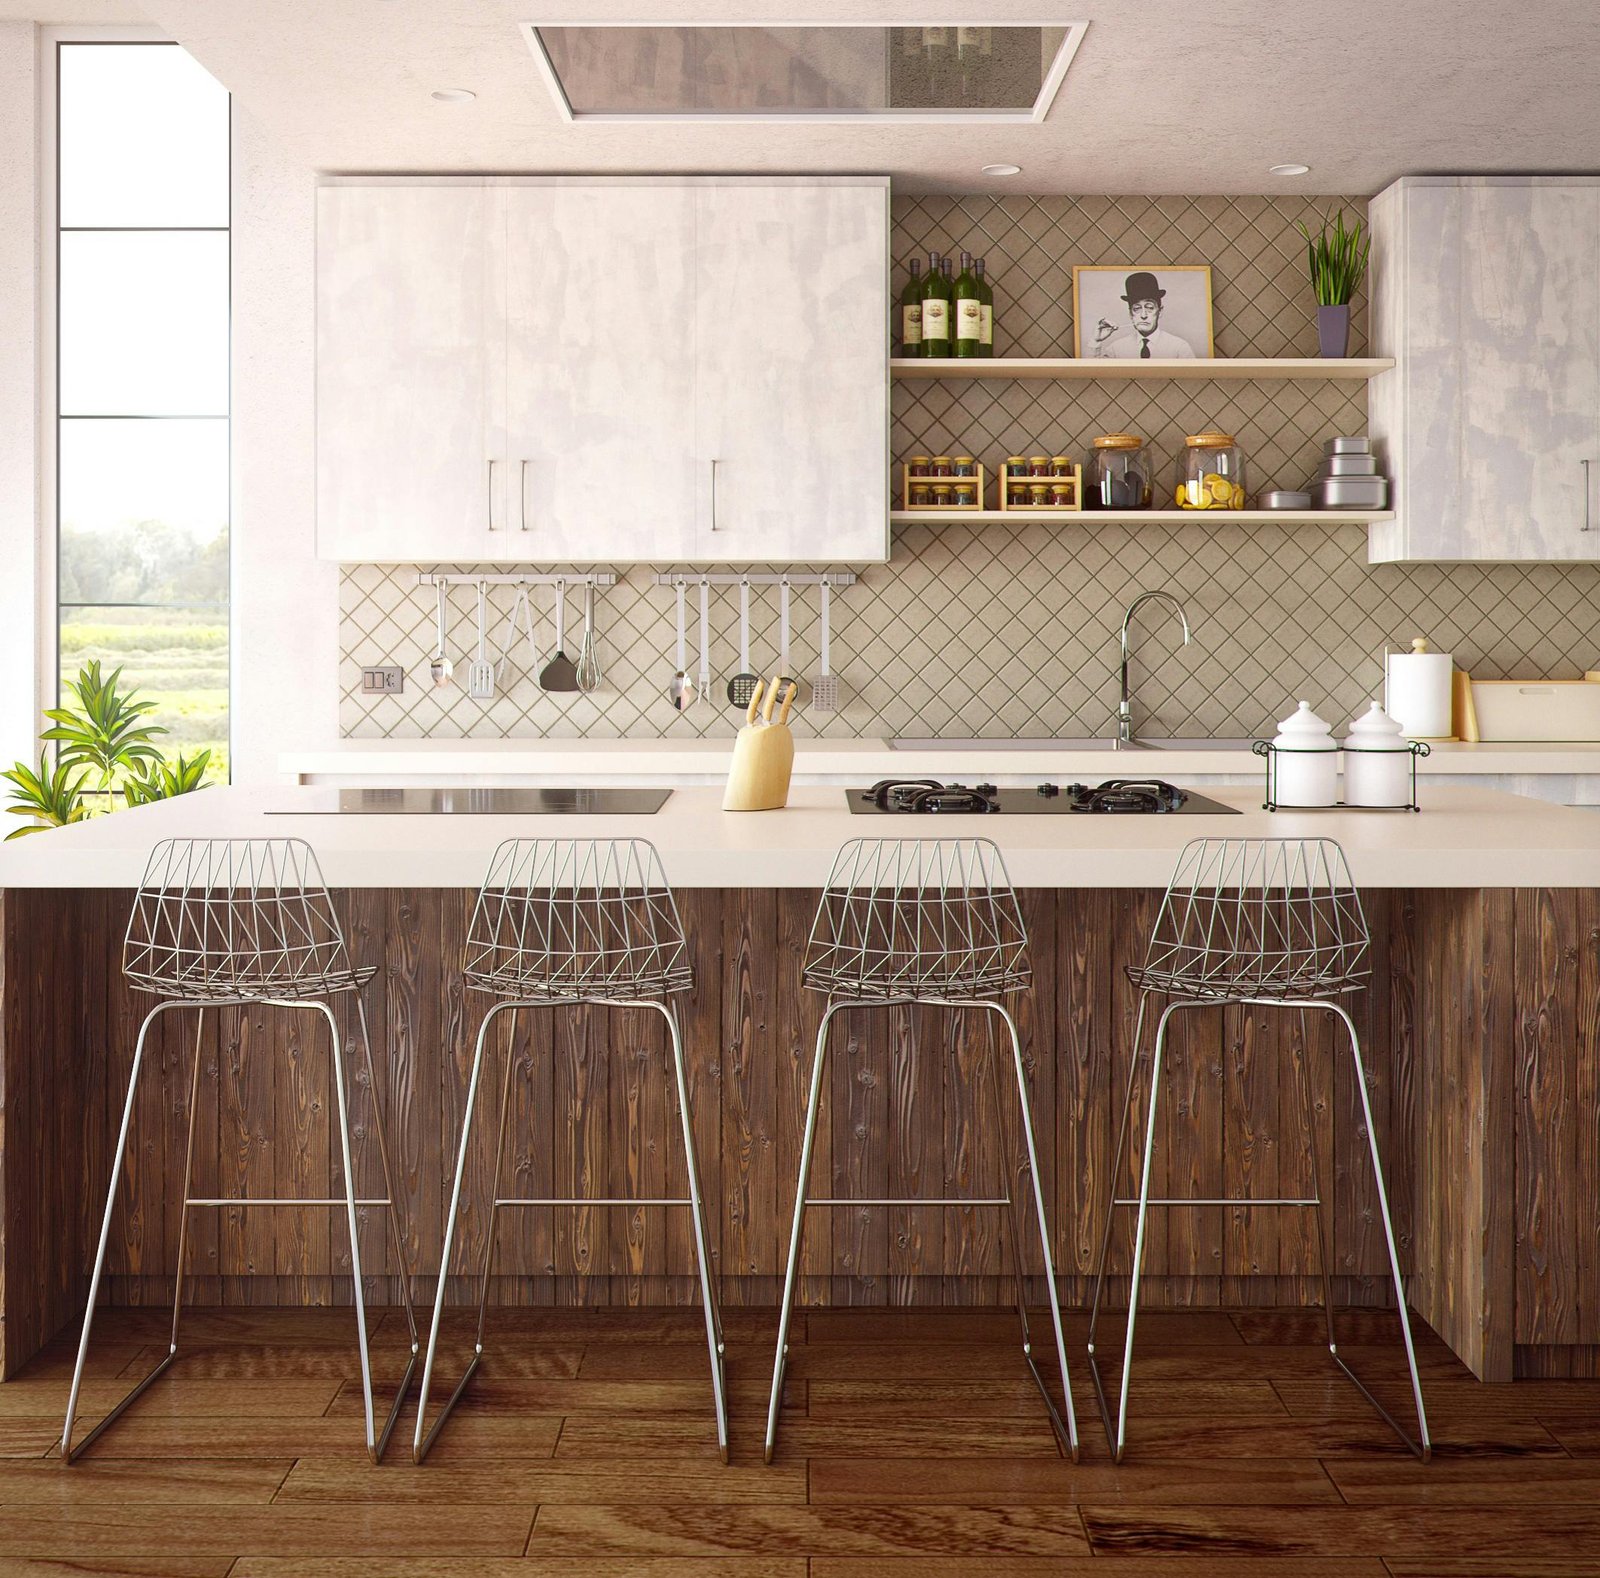 The Heart of the Home: Creating a Functional and Stylish New Kitchen